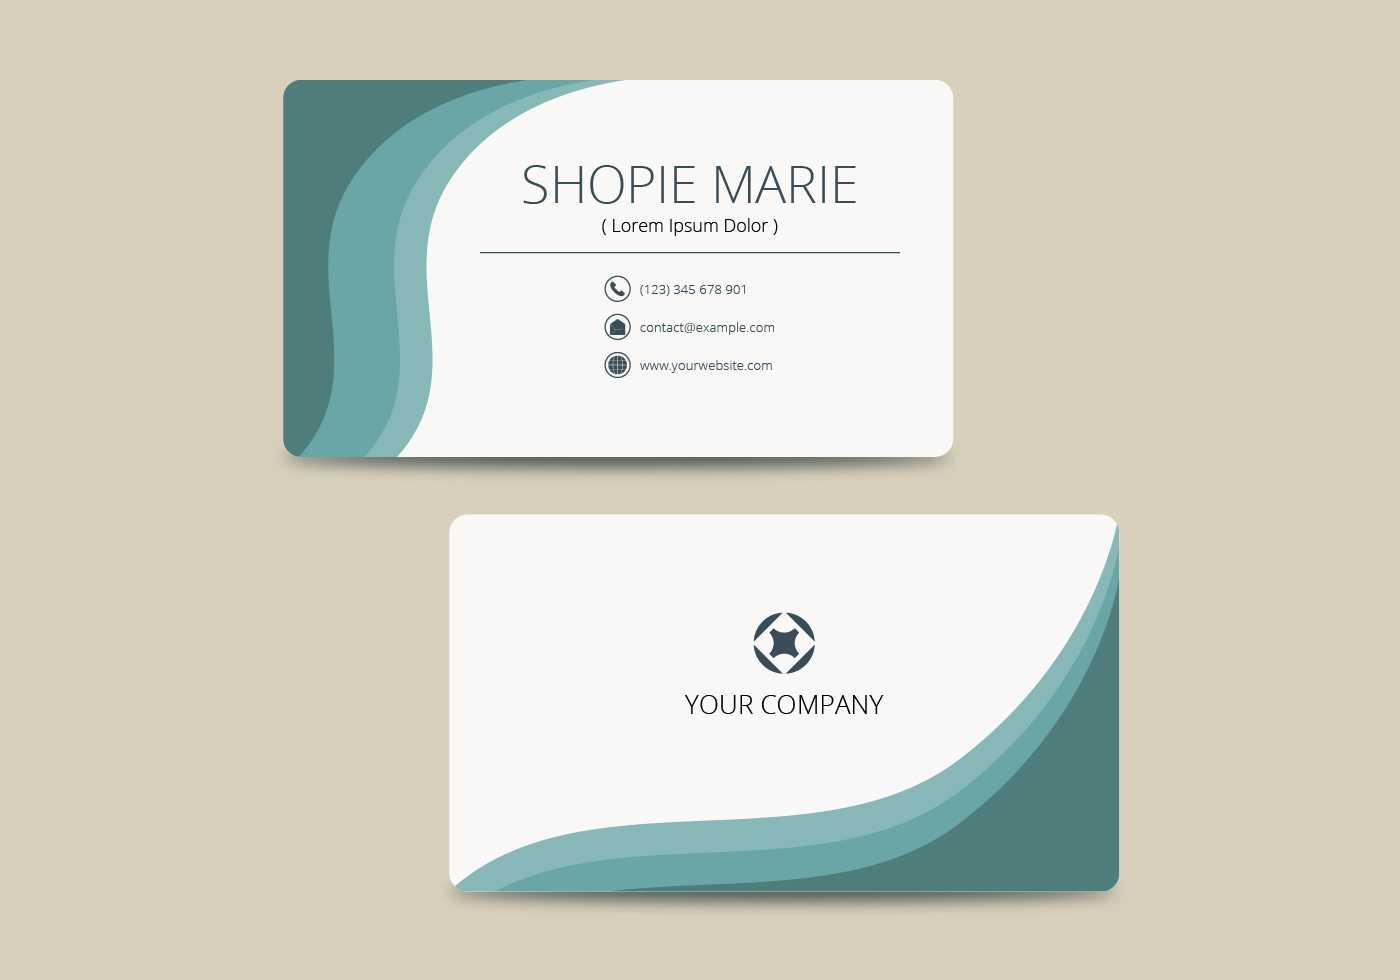 Teal Business Card Template Vector – Download Free Vectors Intended For Call Card Templates